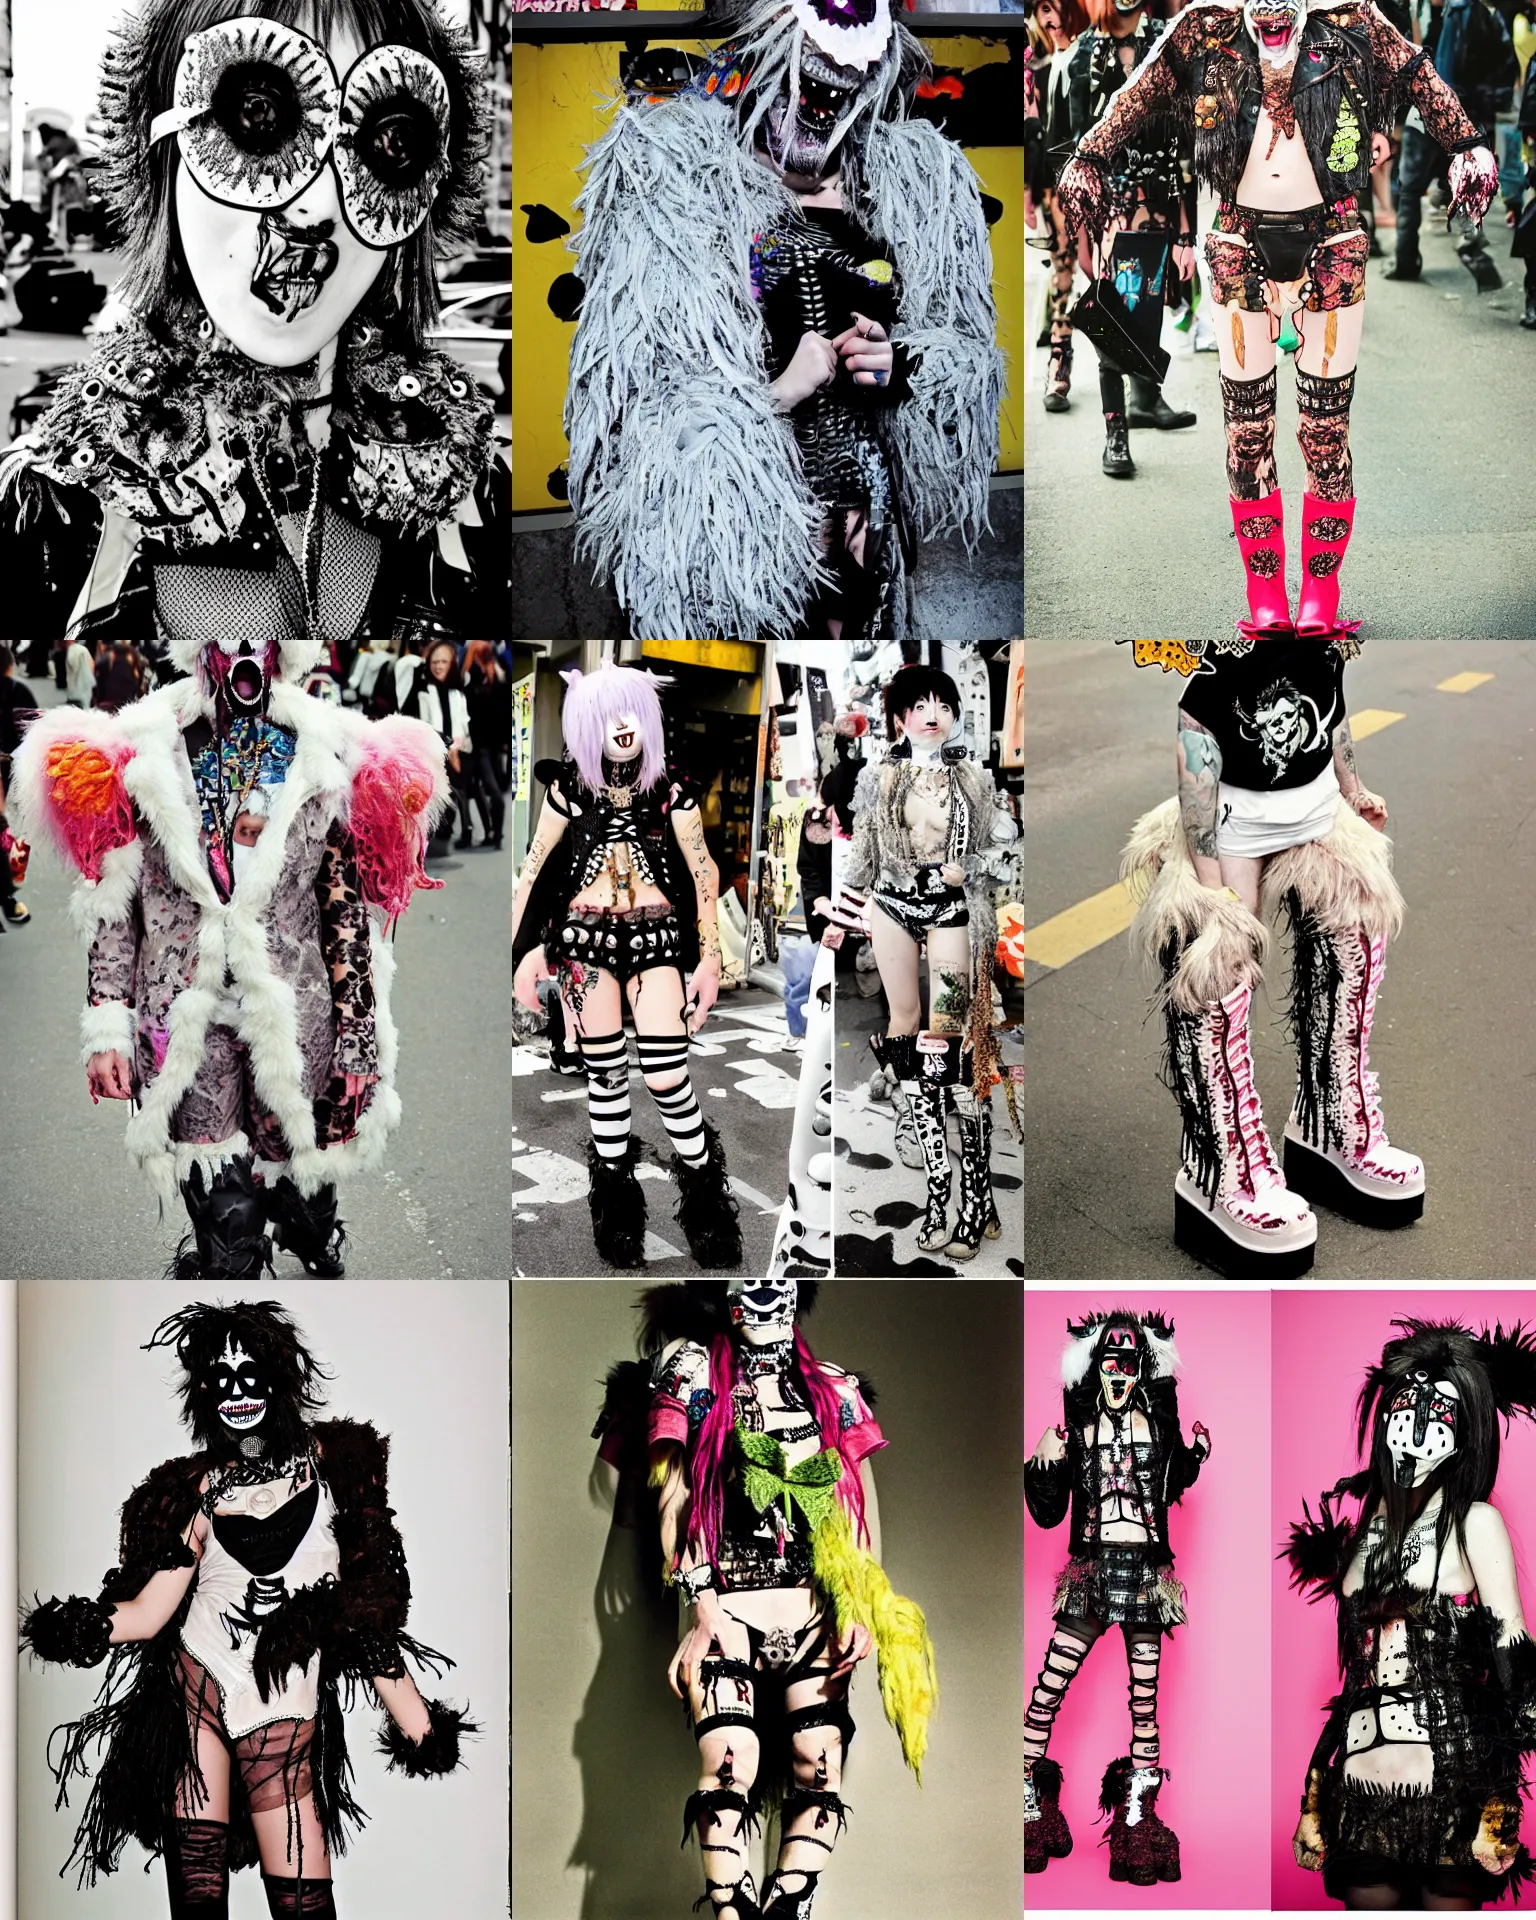 Prompt: photo of lace monster butterfly eye patch wearing ripped up dirty Swear kiss monster teeth yeti platform boots in the style of Walter Van Beirendonck W&LT by 1990's FRUiTS magazine by Shoichi Aoki in the style of 20471120 by Christopher Nemeth in the style of Harajuku stret style japan and in the style Rammellzee by Insane Clown Posse in the style of Ai Yazawa's Nana by CyberDog and emo scene style by Ryan Trecartin in the style of Dorian Electra by Rick Owens by Jun Takahashi in a dirty dark dark dark poorly lit bedroom full of trash and garbage server racks and cables everywhere in the style of Juergen Teller in the style of Shoichi Aoki, japanese street fashion, KEROUAC magazine,, Milk Bar Magazine, Vivienne Westwood, y2K aesthetic